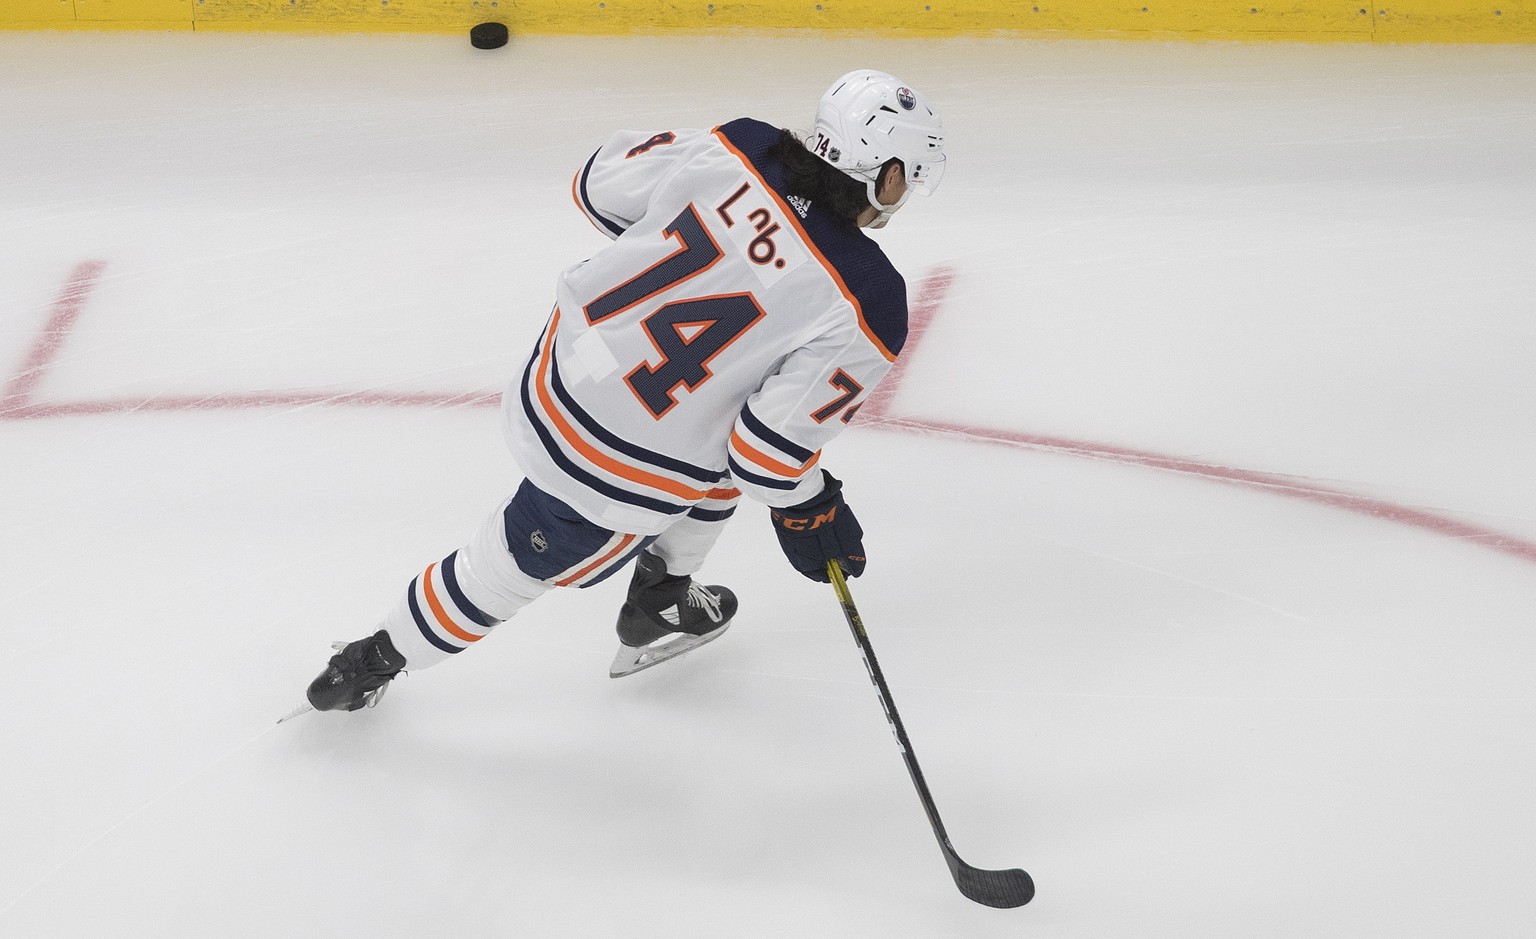 Edmonton Oilers Ethan Bear (74) wears his jersey with his name in Cree during warm up against the Calgary Flames before an exhibition NHL hockey game Tuesday, July 28, 2020 in Edmonton, Alberta. (Jaso ...